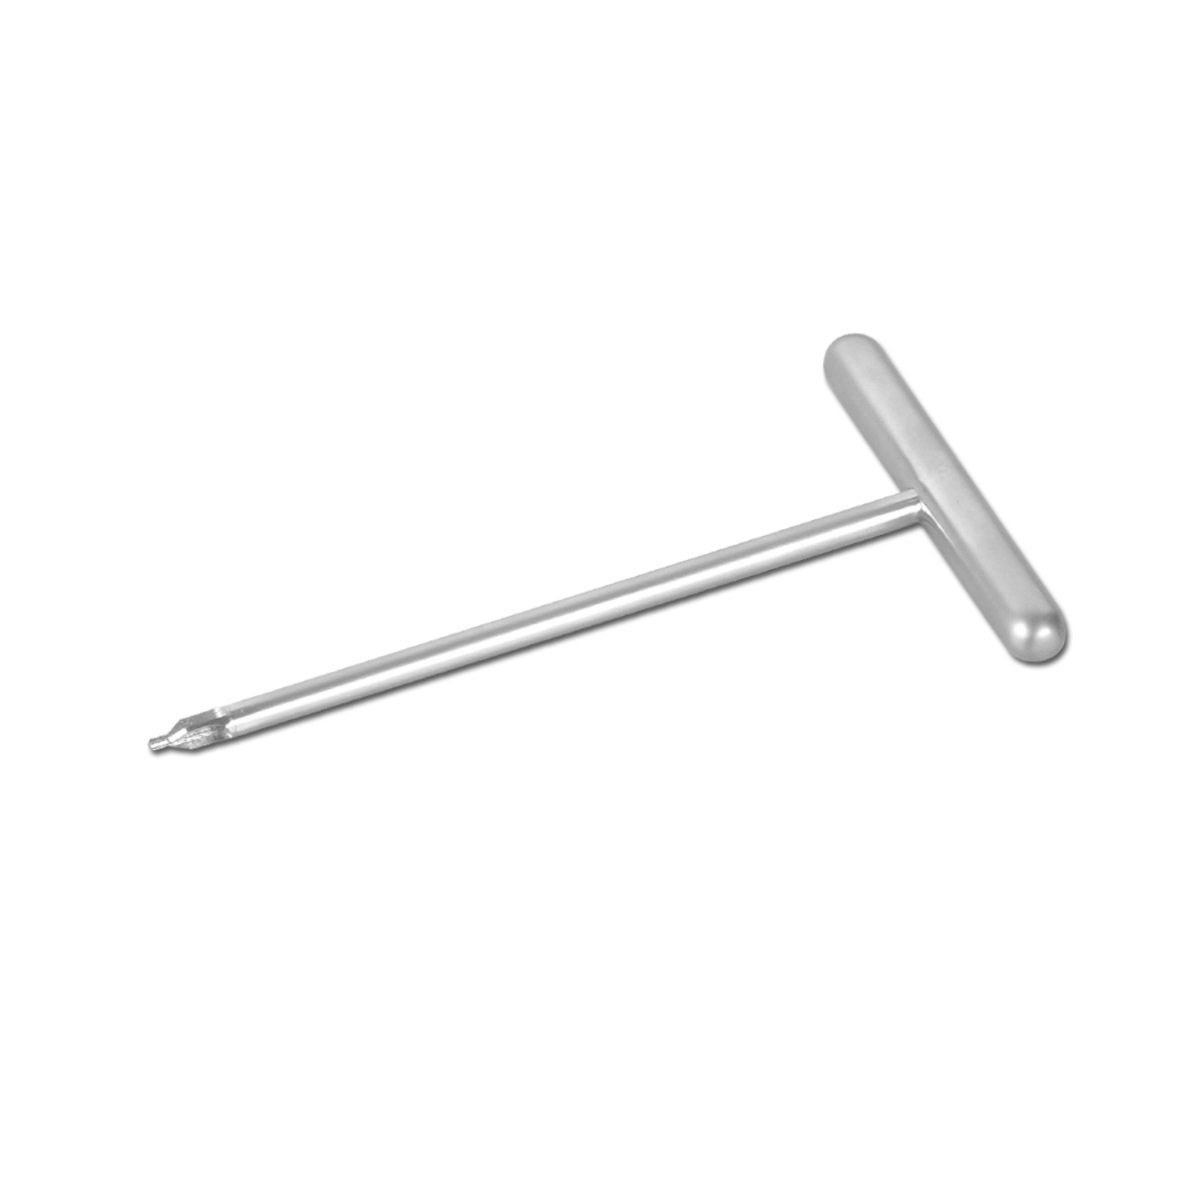 Counter-Sink-with-T-Handle-5.0-MM-Head-for-1.5-2.0-MM-Screws.jpg